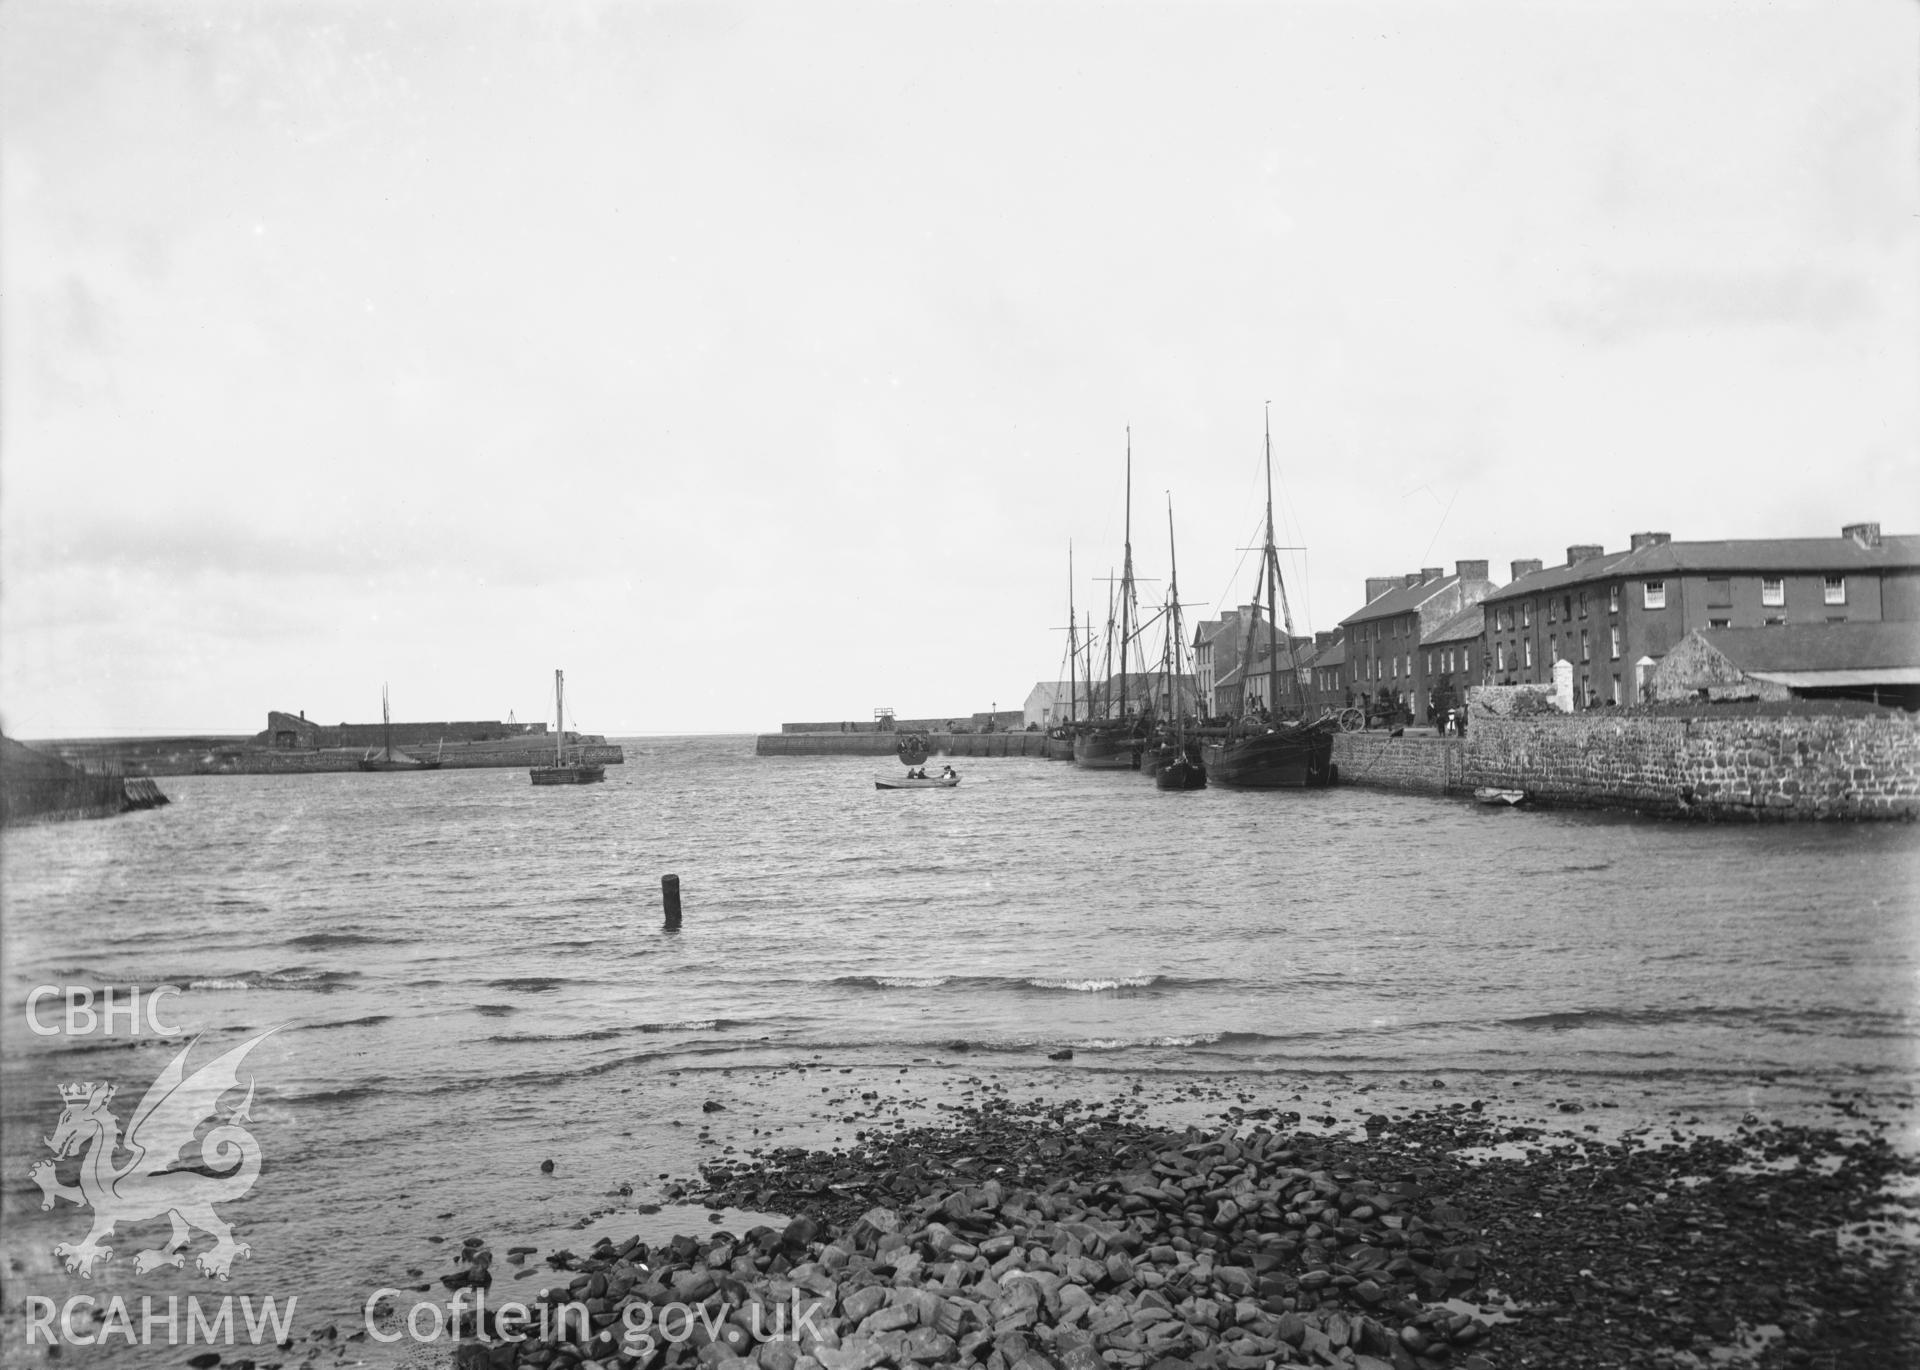 Black and white image dating from c.1910 showing the harbour in Aberaeron taken from inland, buildings in Cadwgan Place and Pen Cei are visible on the right and a number of sailing vessels are moored on the quay.